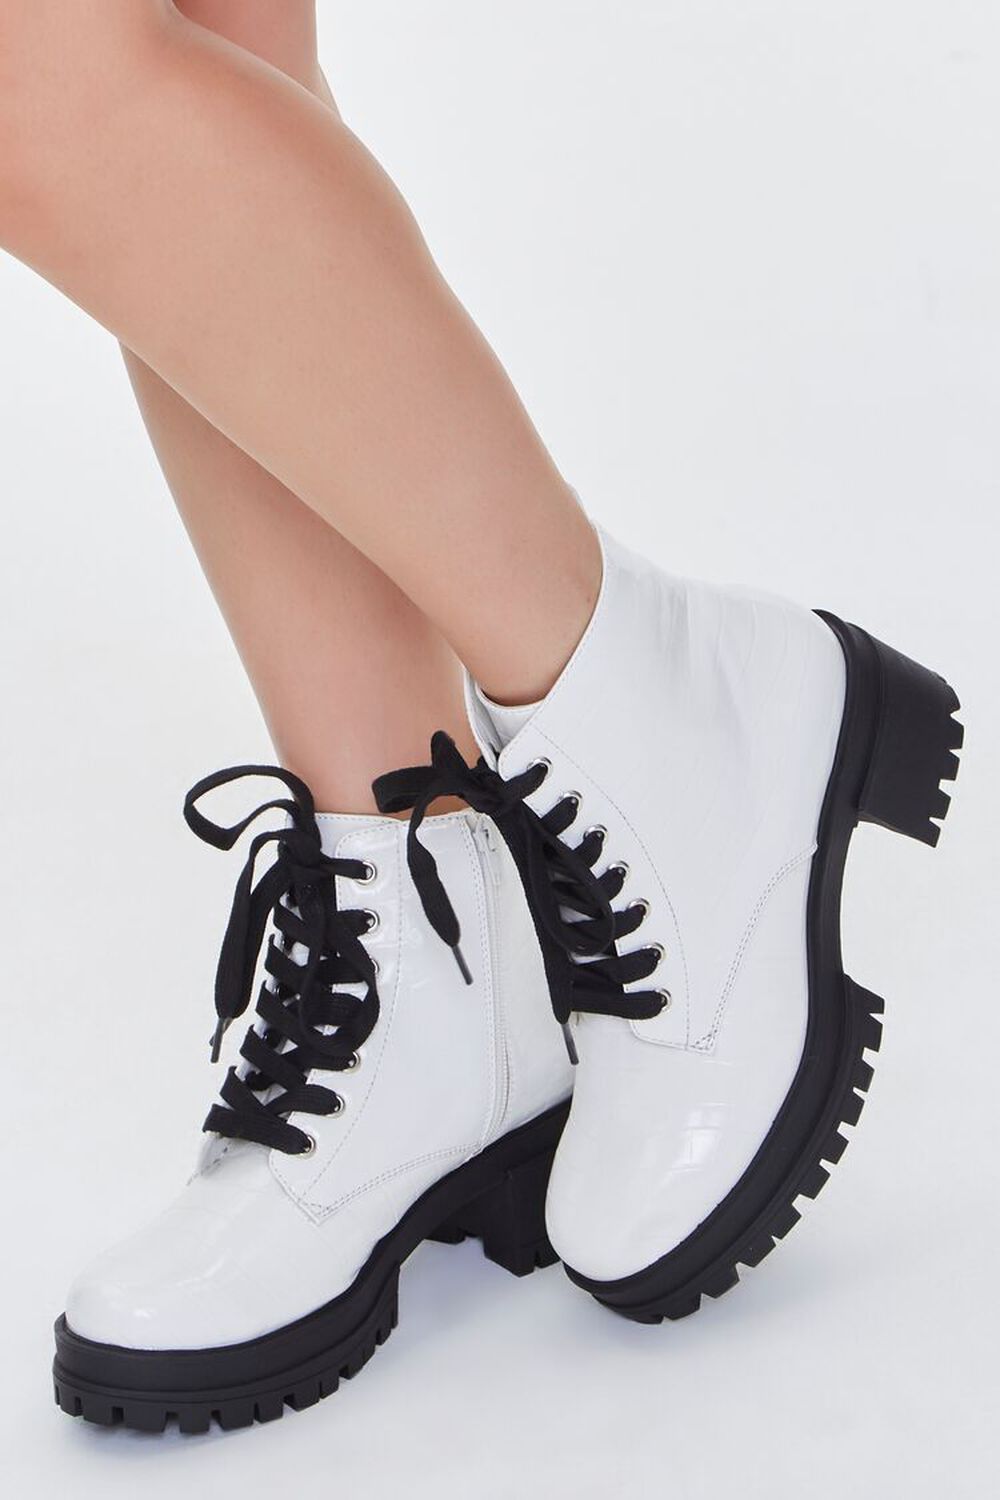 WHITE Faux Croc Leather Lace-Up Booties, image 1